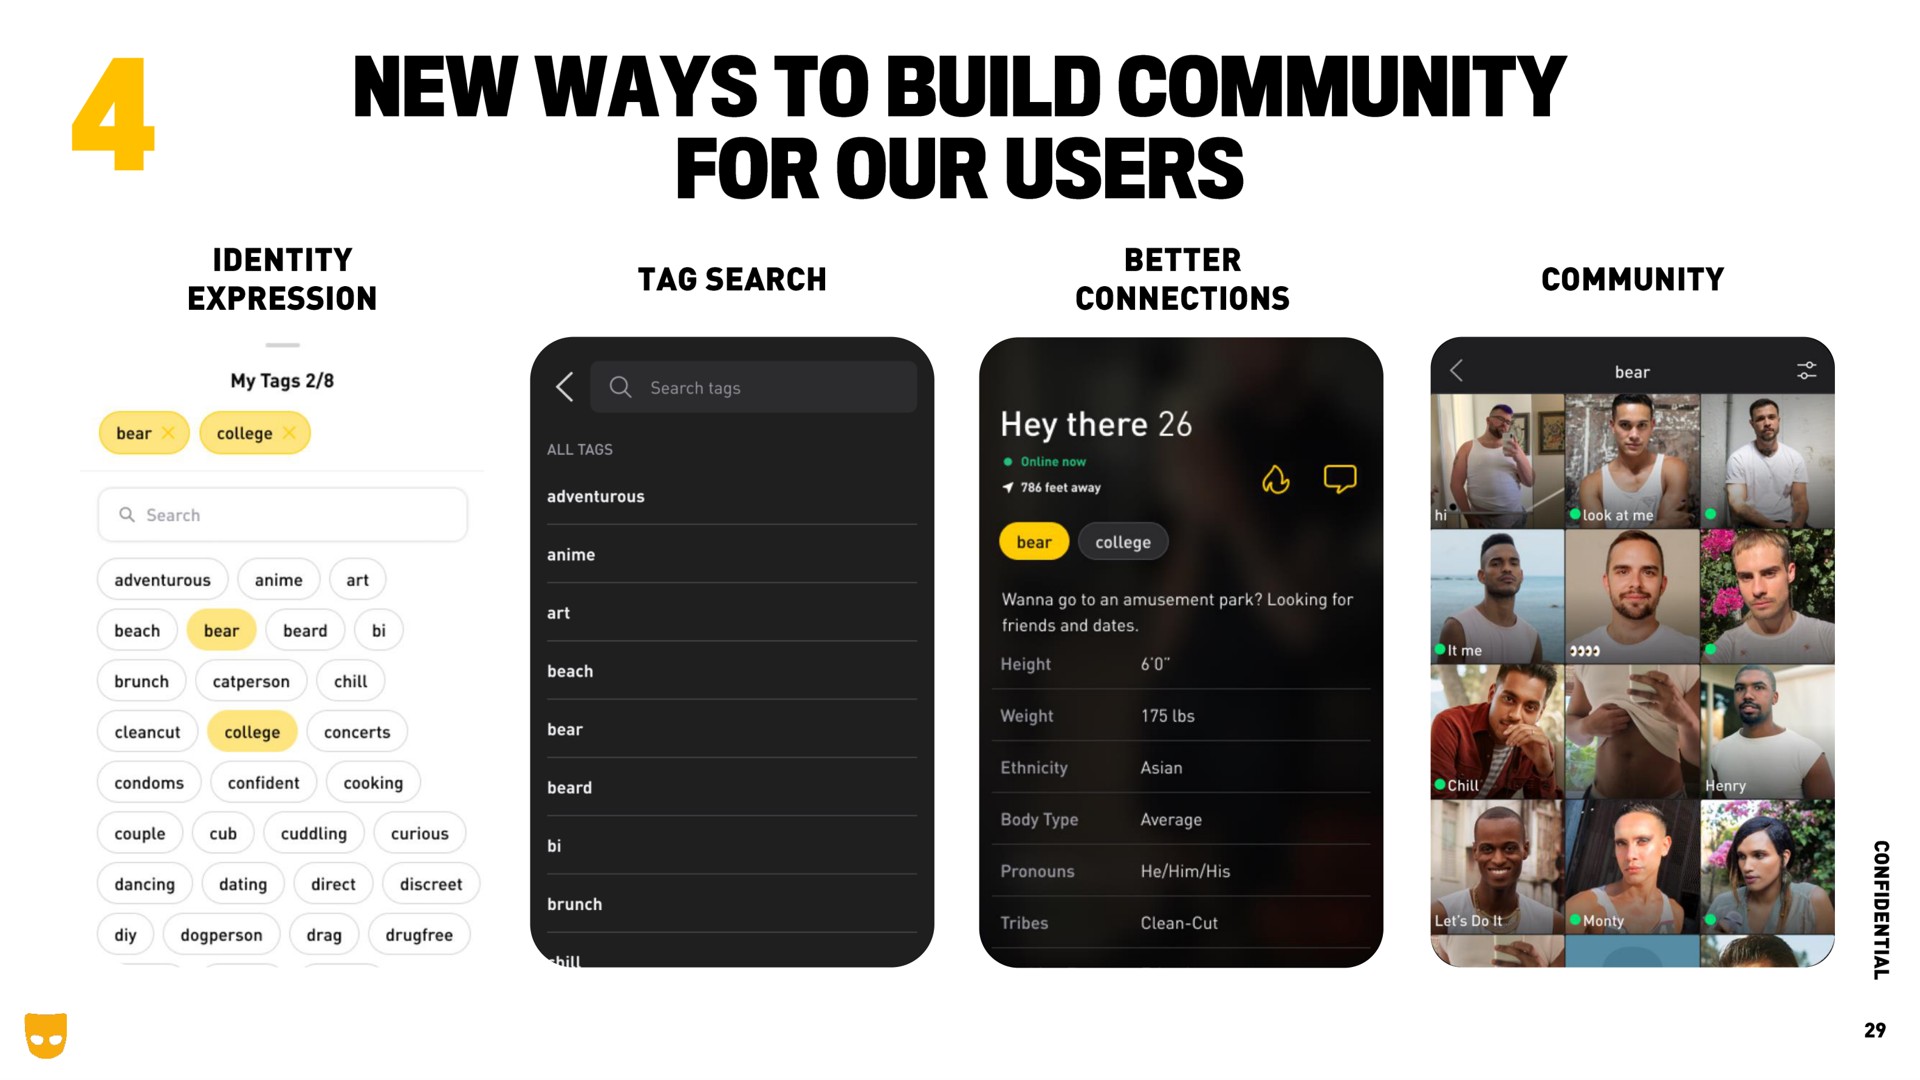 new ways to build community for our users | Grindr